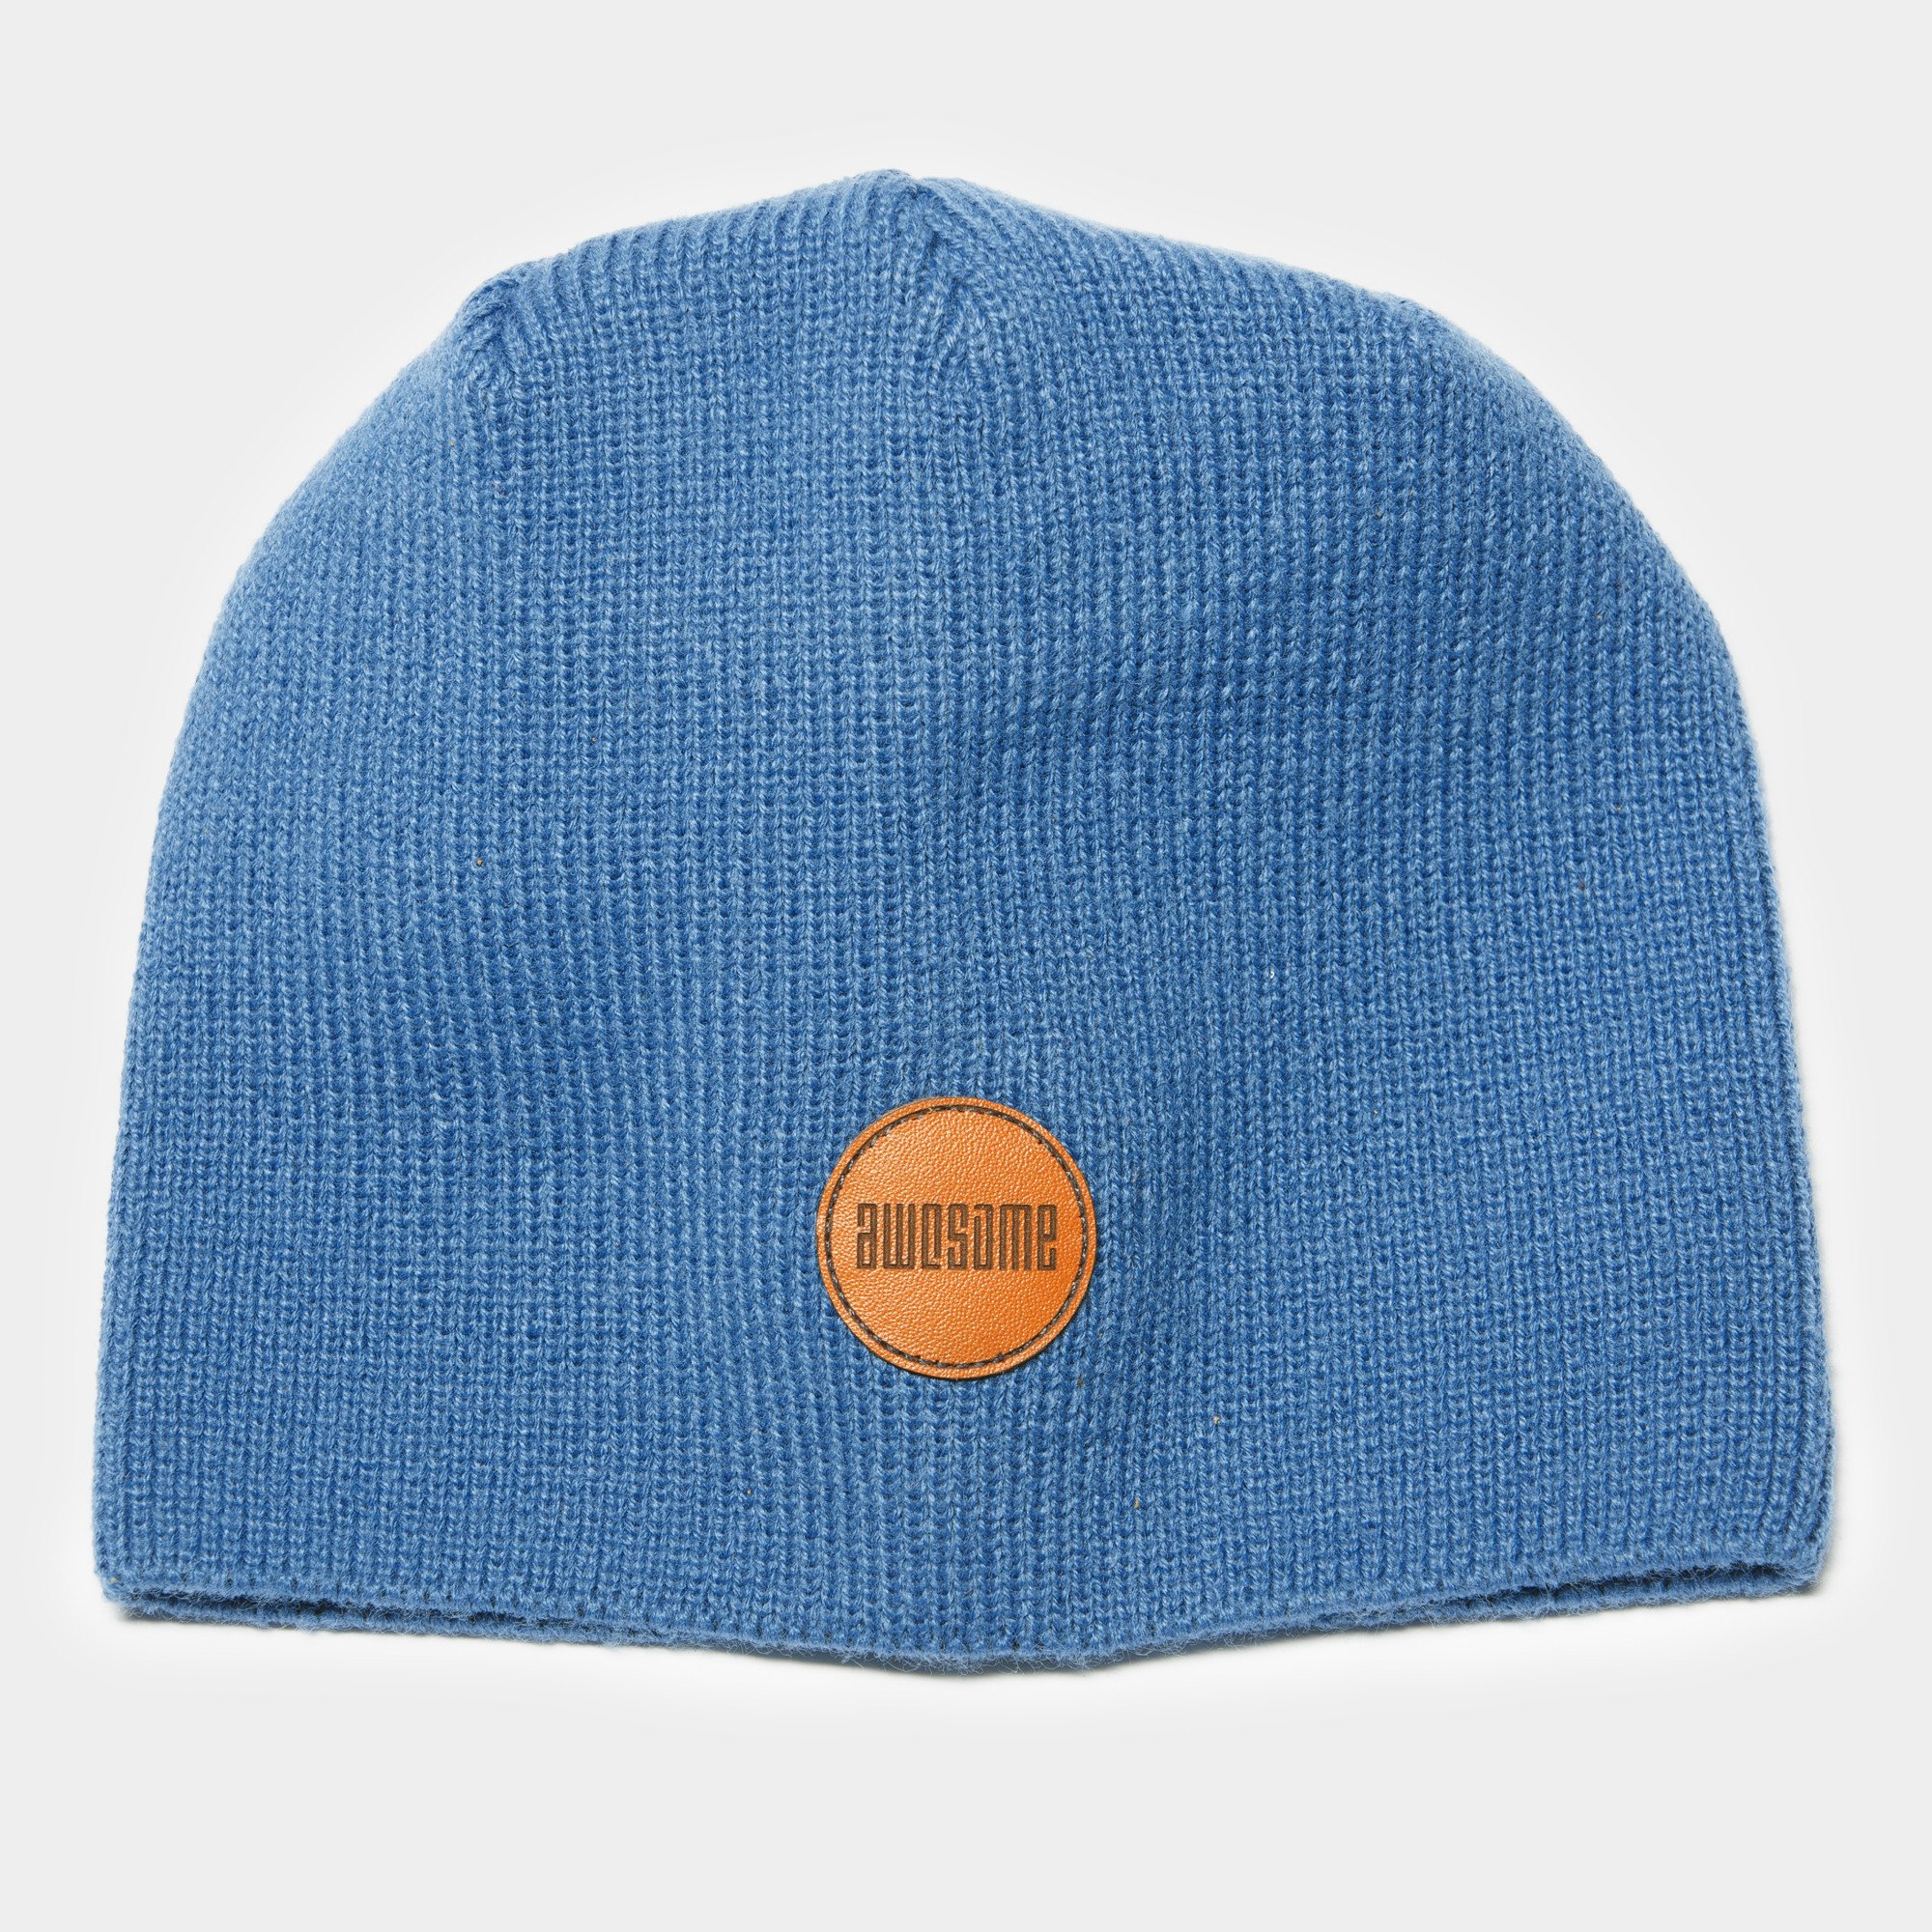 Awesome Beanie Leather Patch - Navy